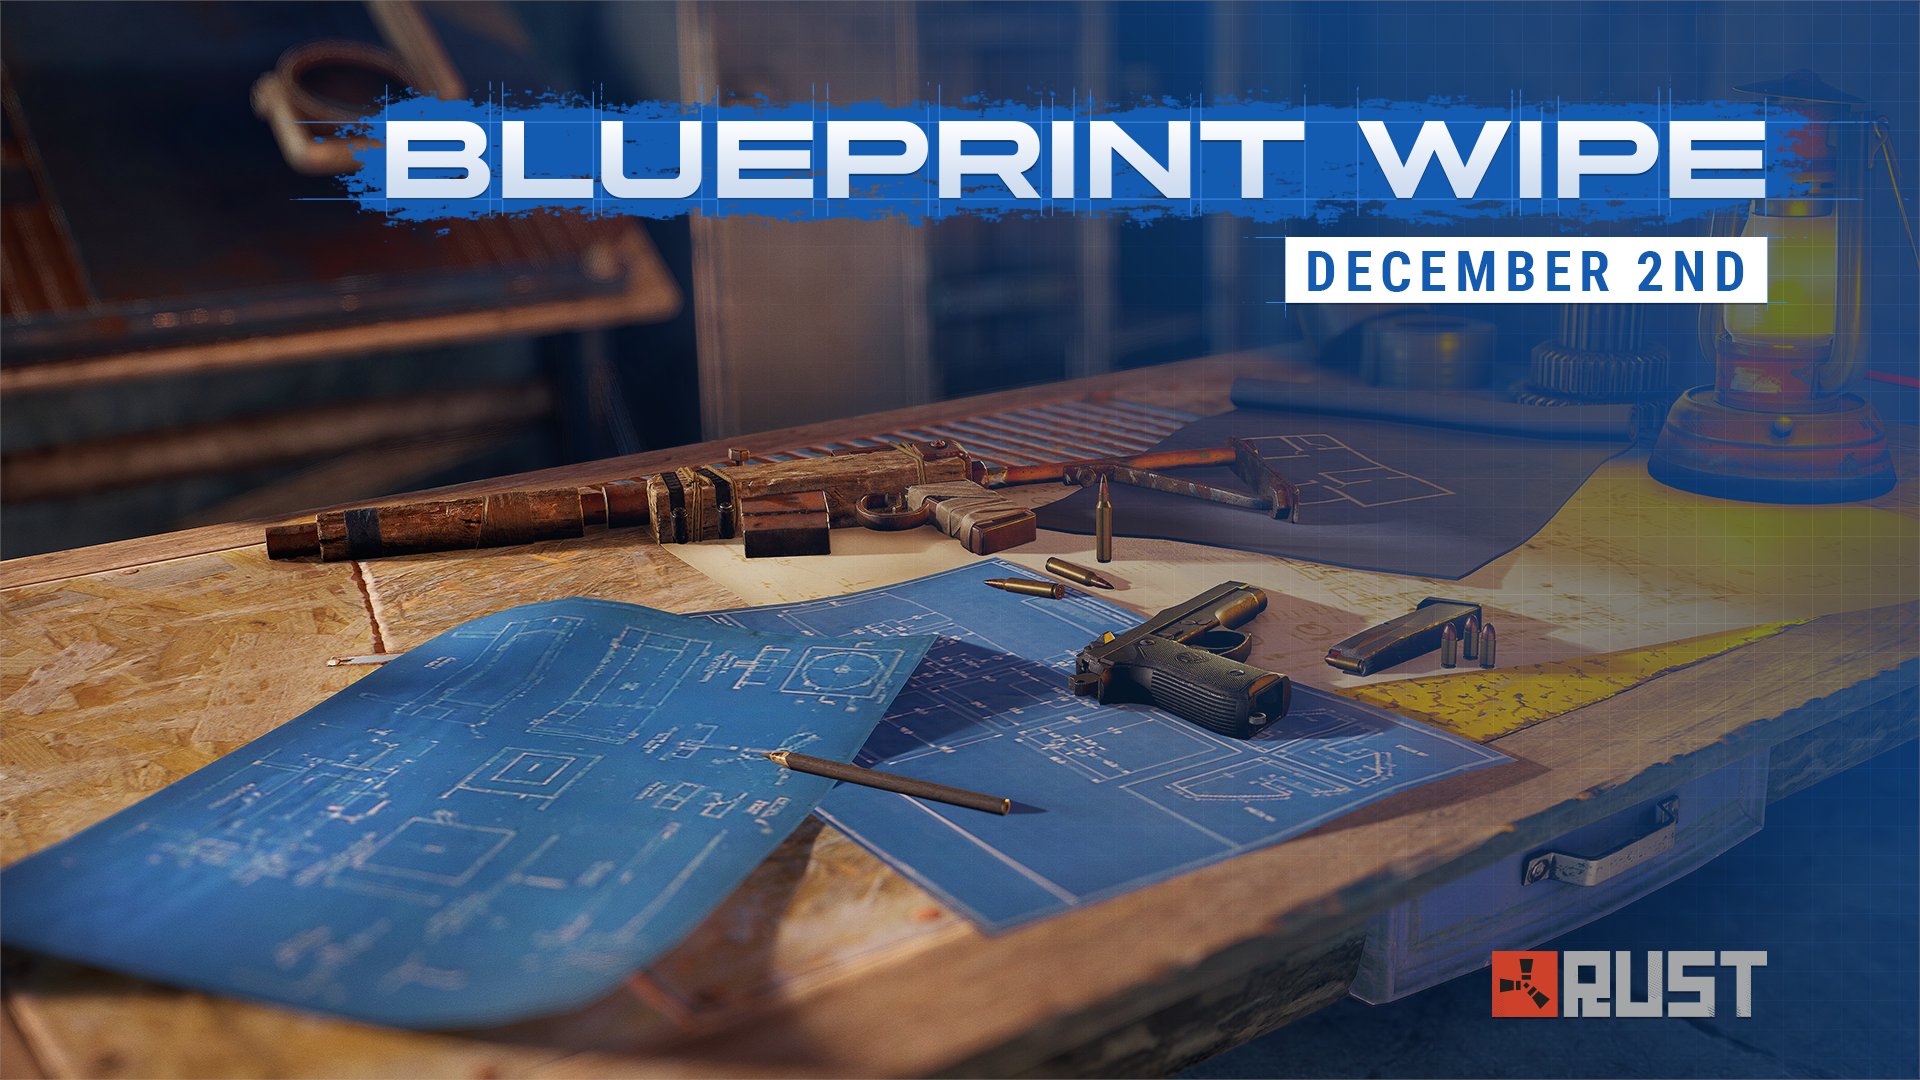 Rust on X: "There will be Blueprint Wipe on all servers with the upcoming update on 2nd December. https://t.co/dTy2zzDgKU" / X